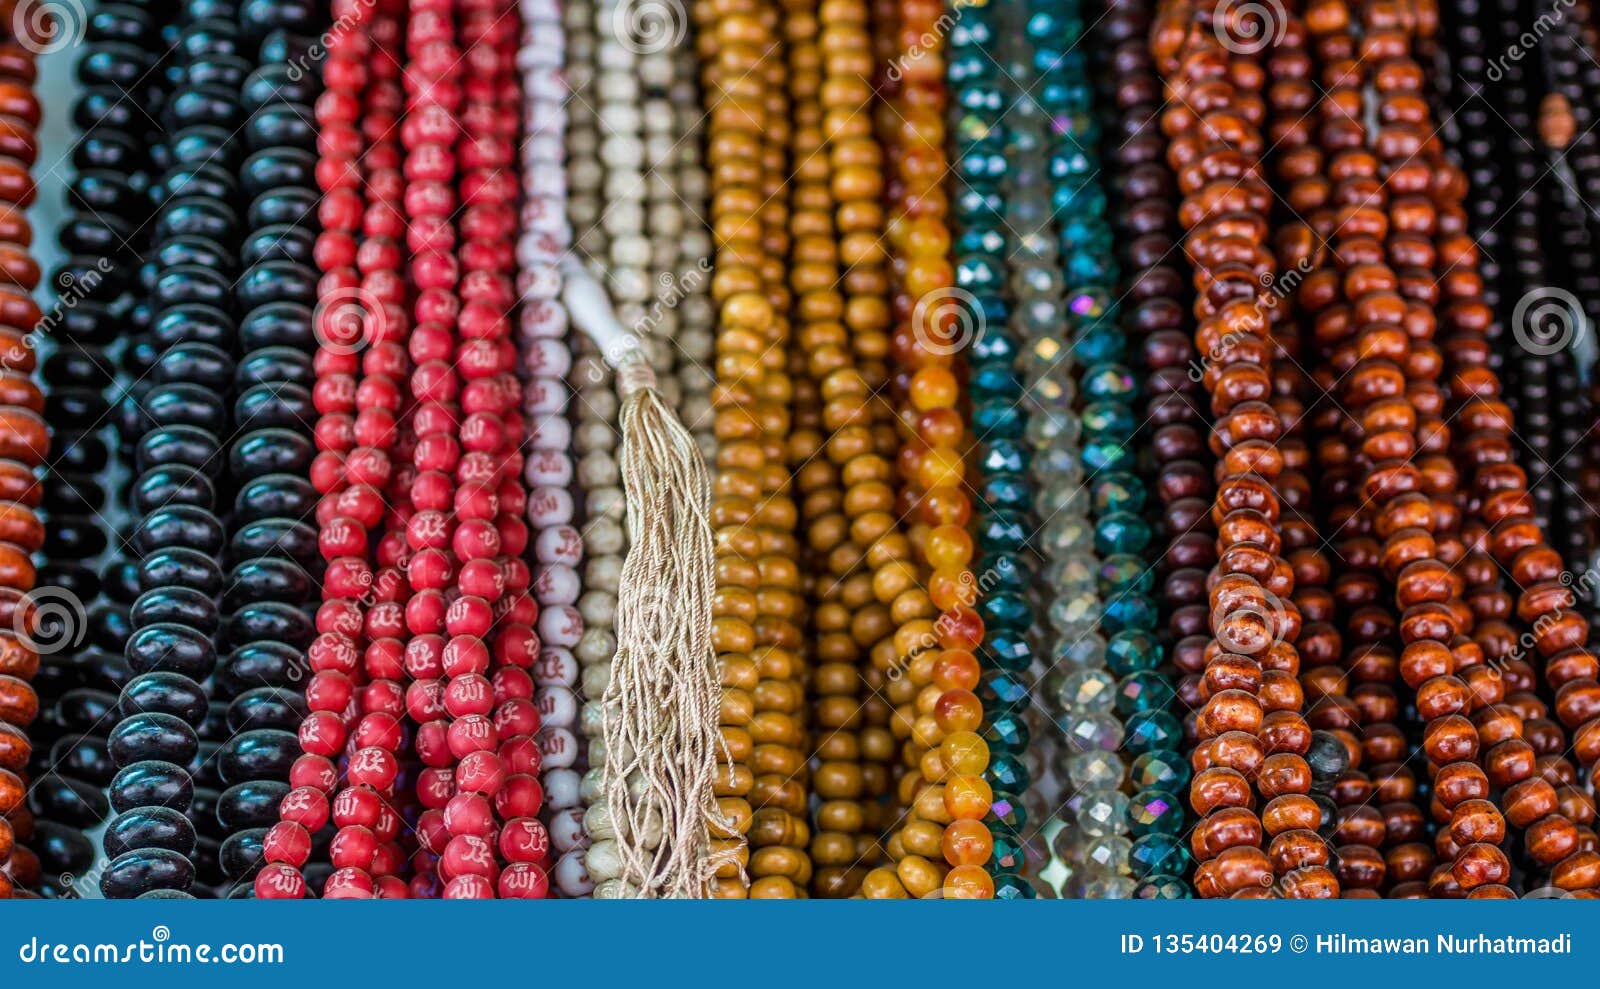 Traditional Handicraft Made from Colorful Beads Stock Image - Image of ...